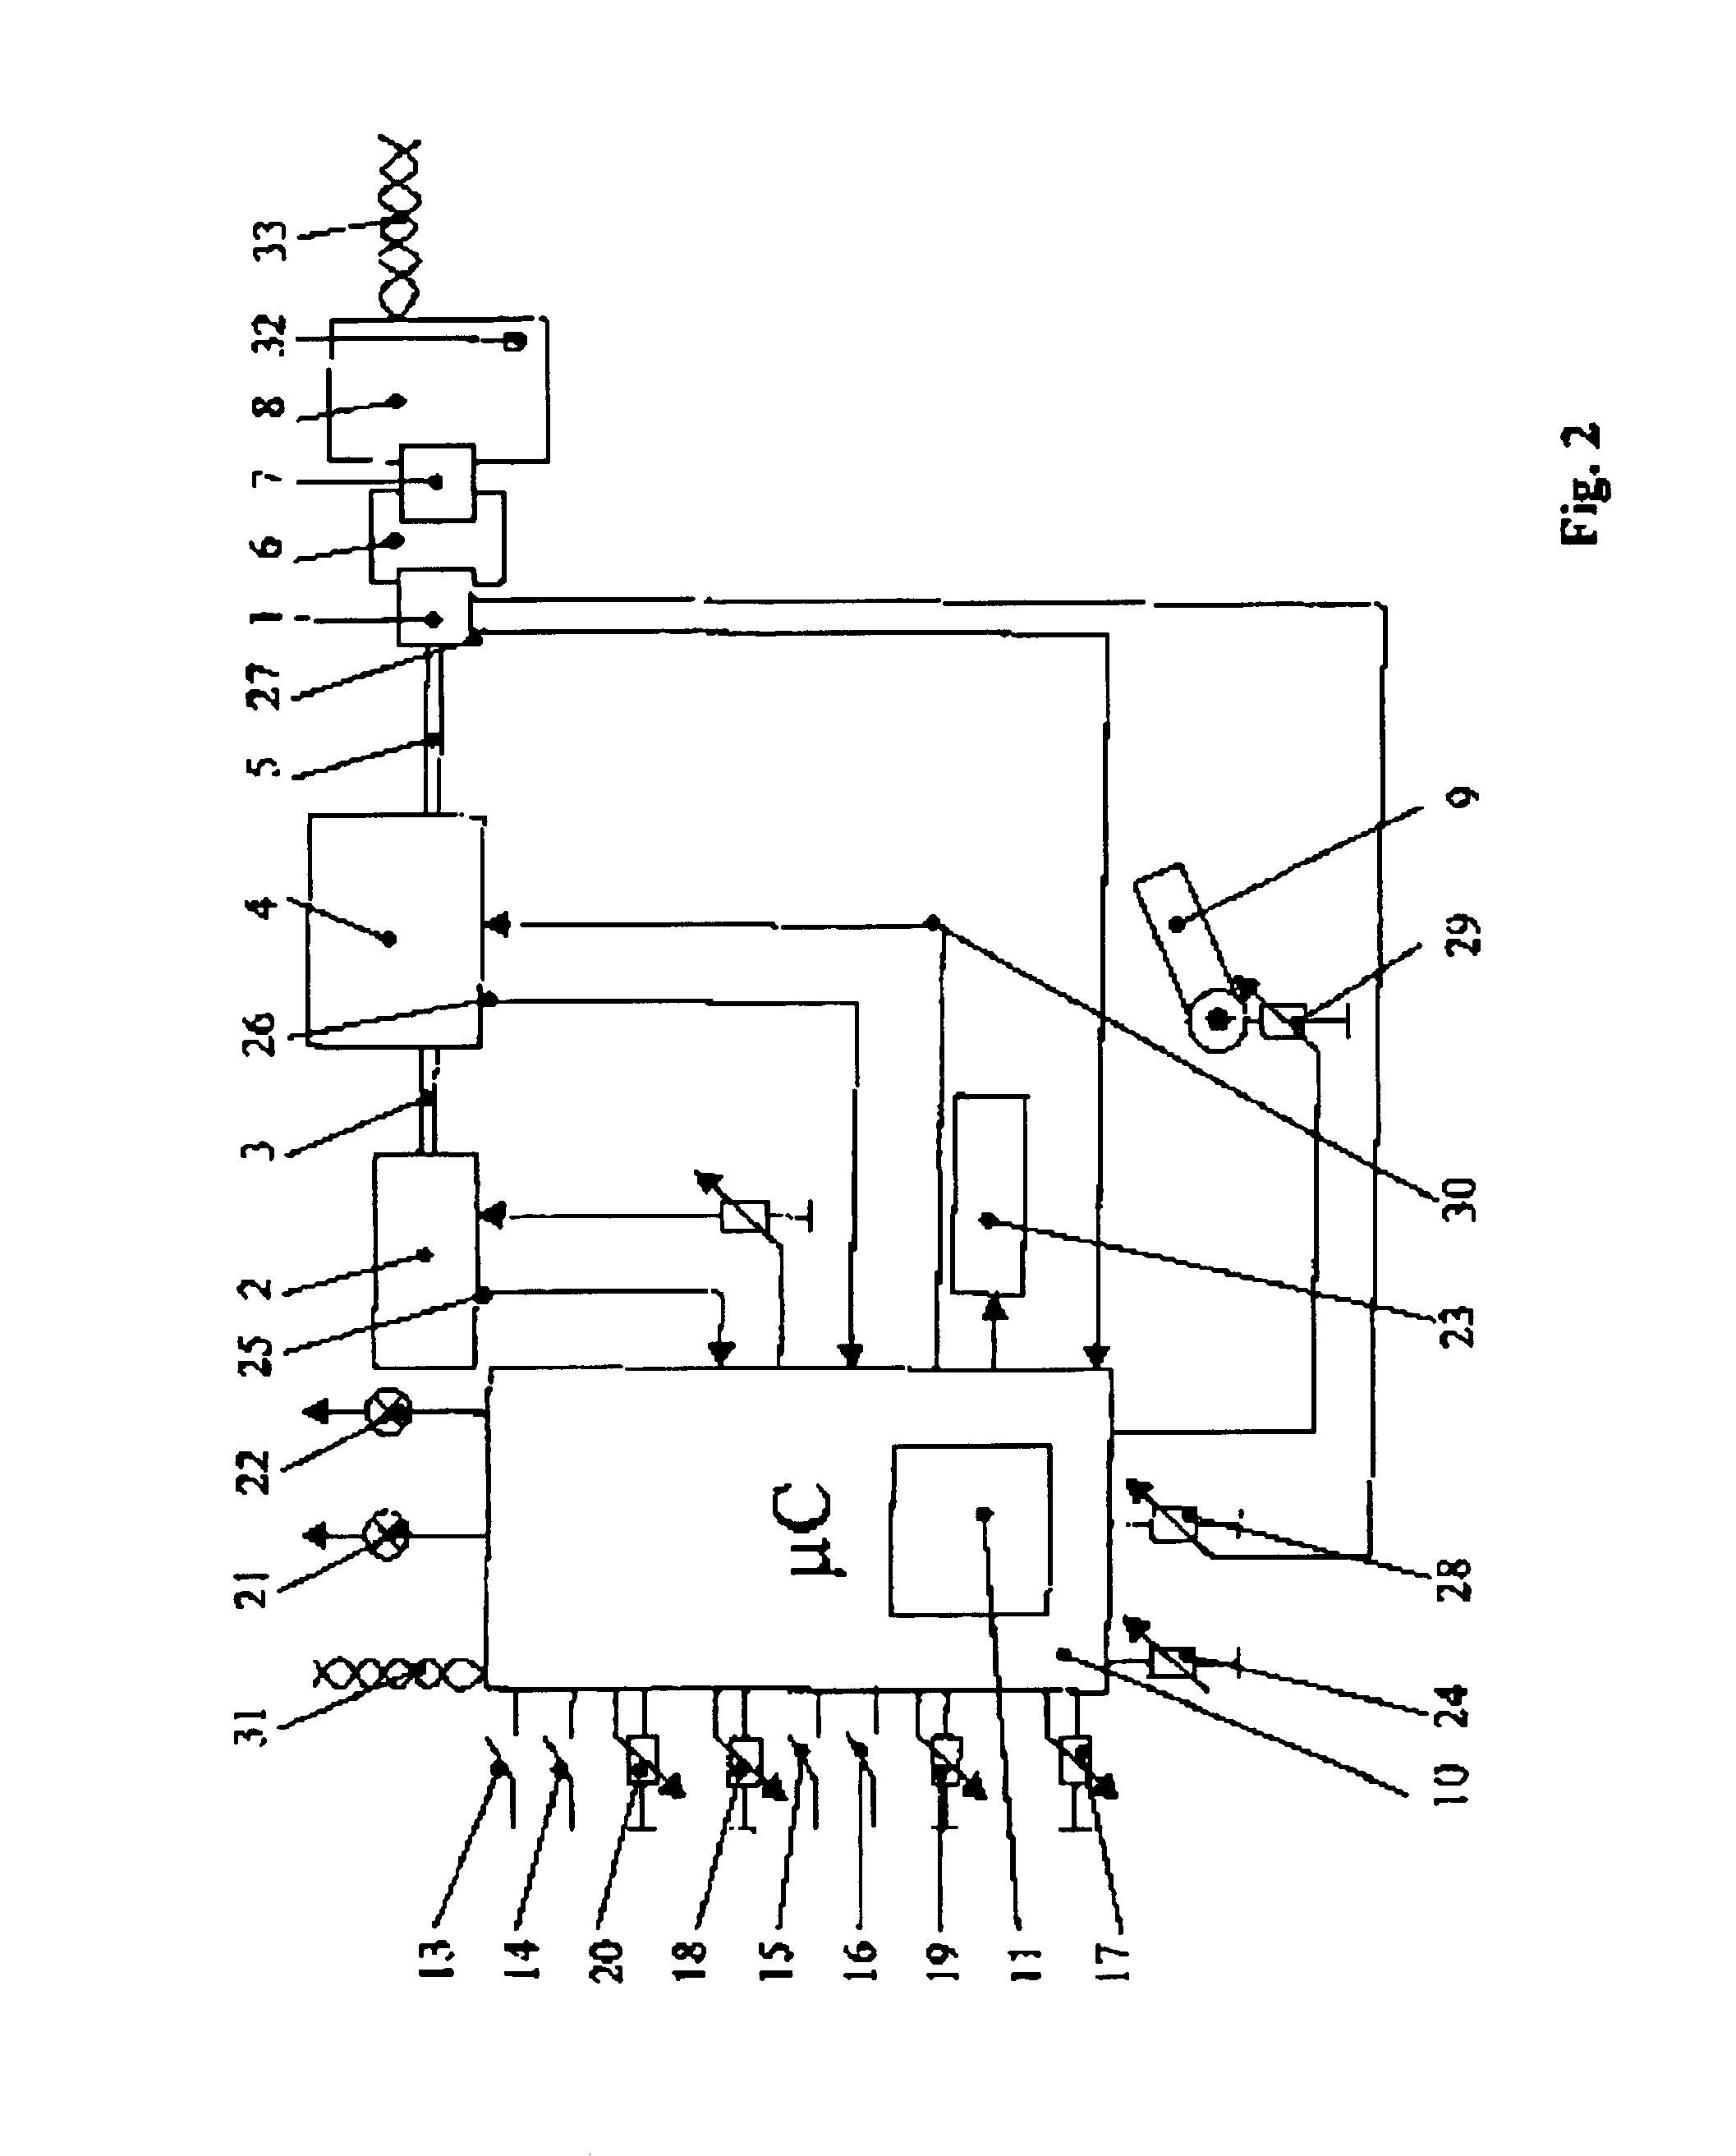 Control system for the drive of a pto for an agricultural vehicle